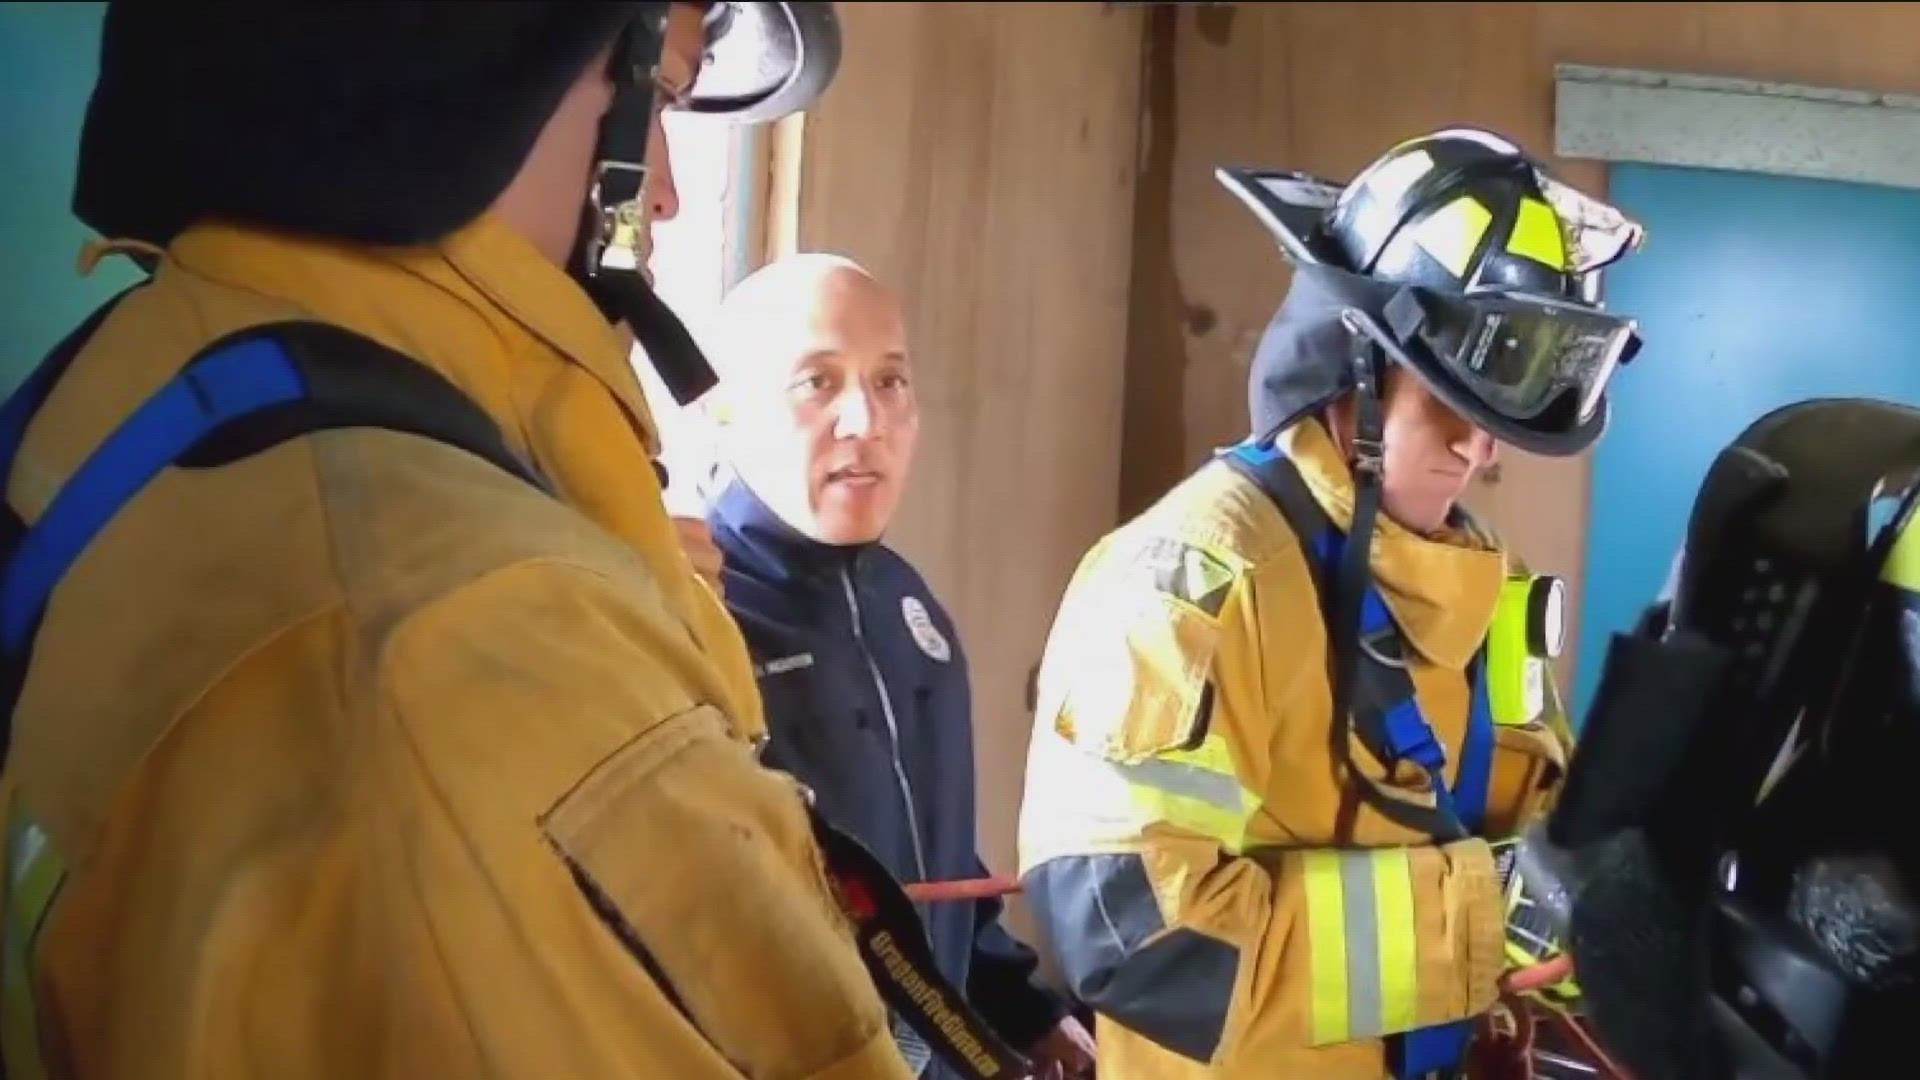 A beloved firefighter from Chula Vista is in the hospital fighting cancer after being diagnosed with leukemia.